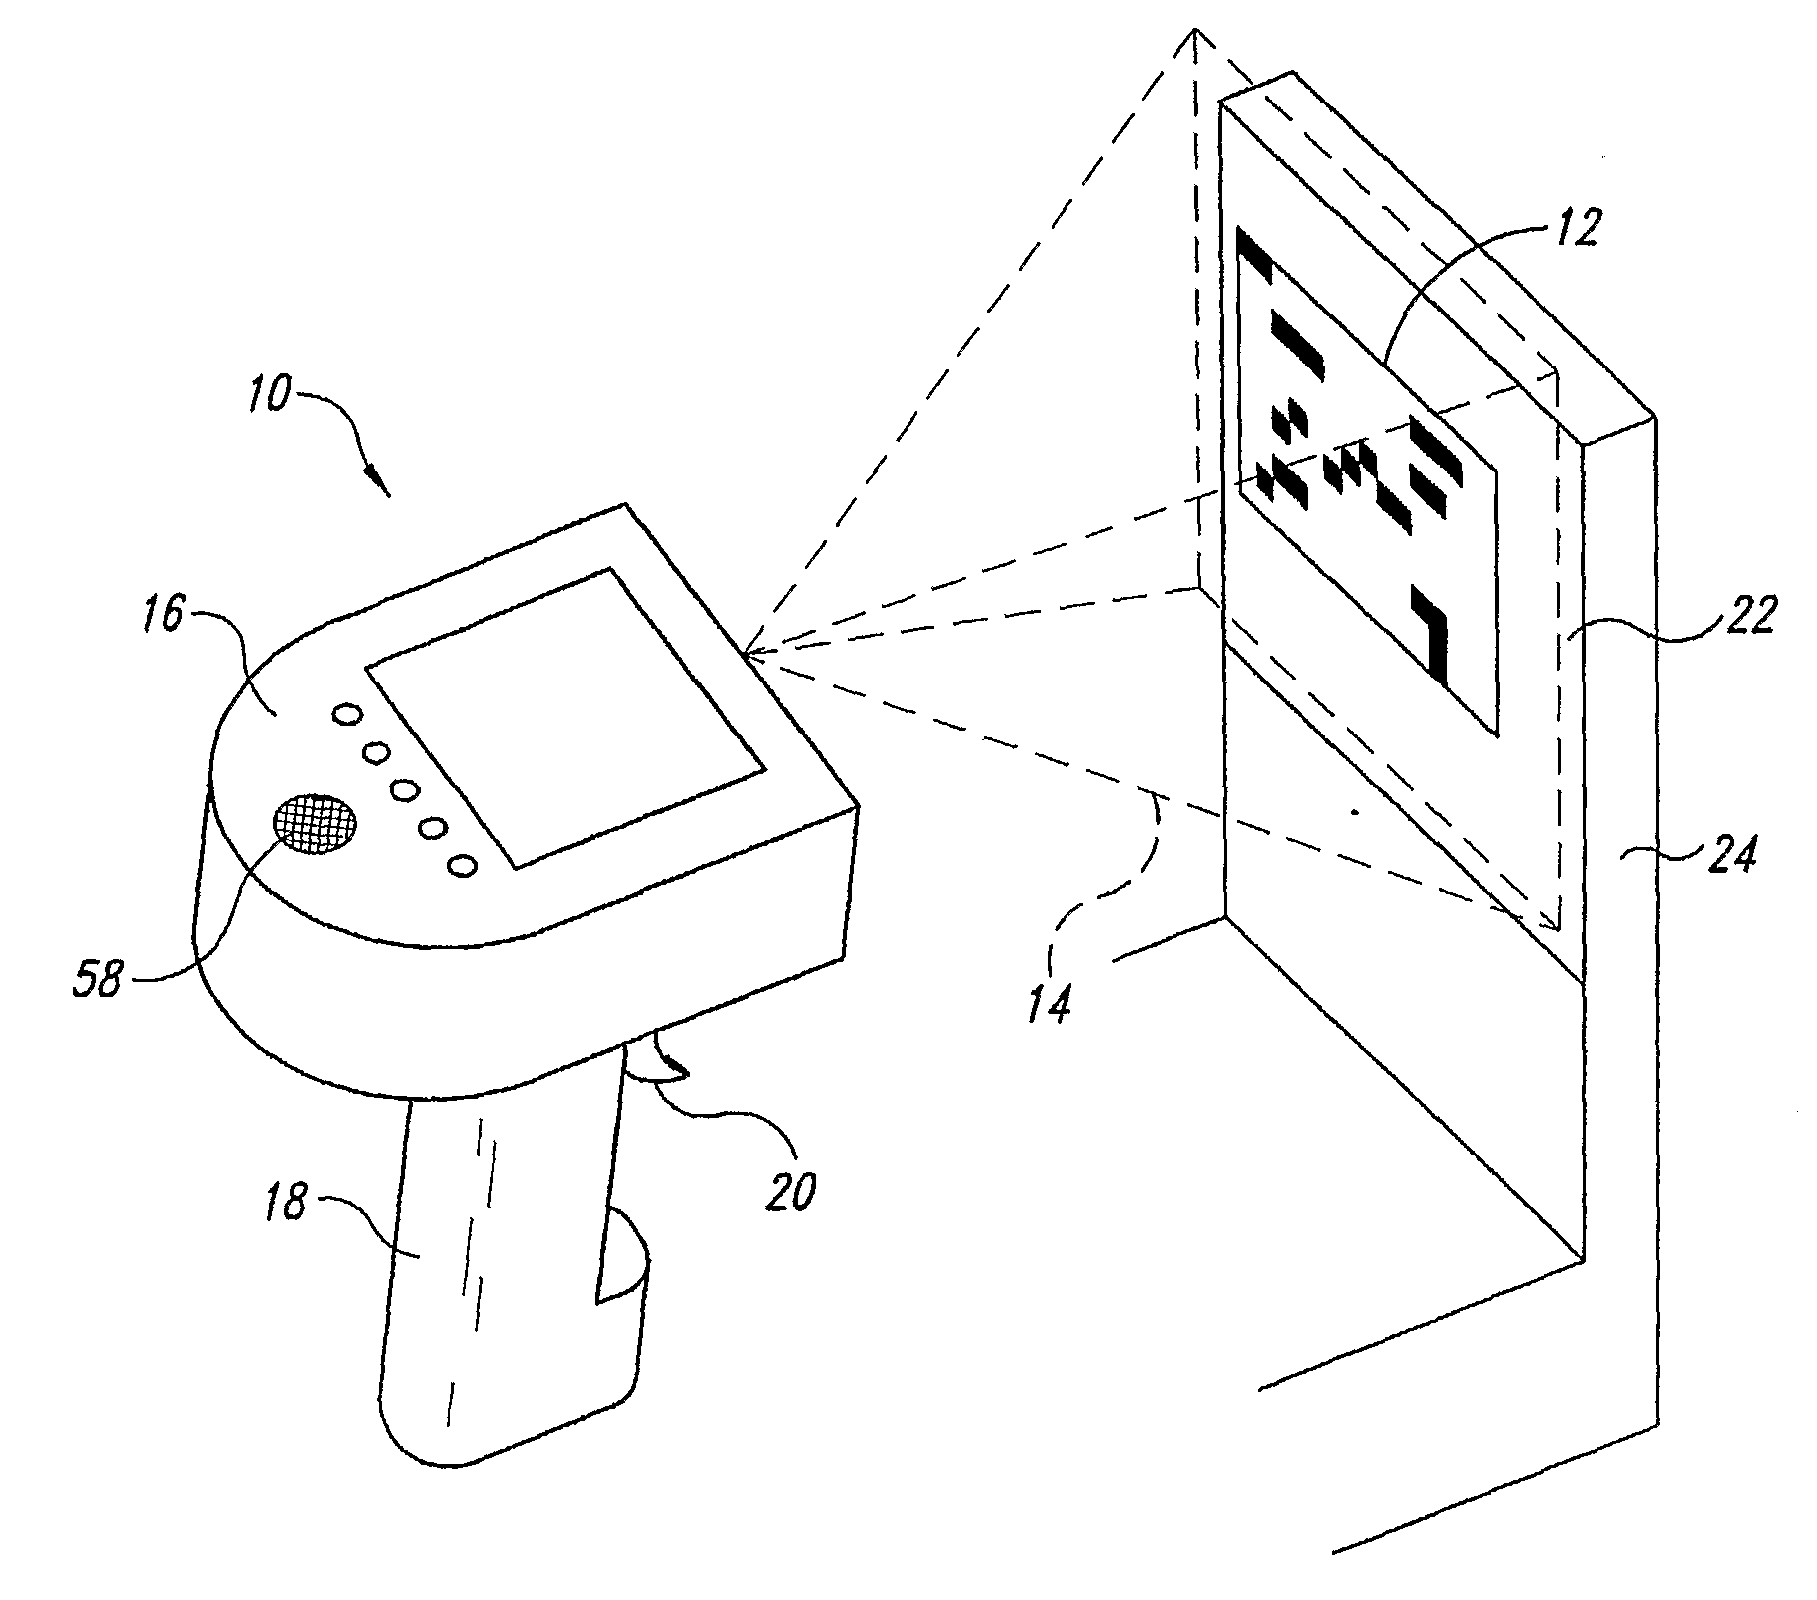 Noise Reduction by Image Subtraction in an Automatic Data Collection Device, Such as an Image Acquisition Device